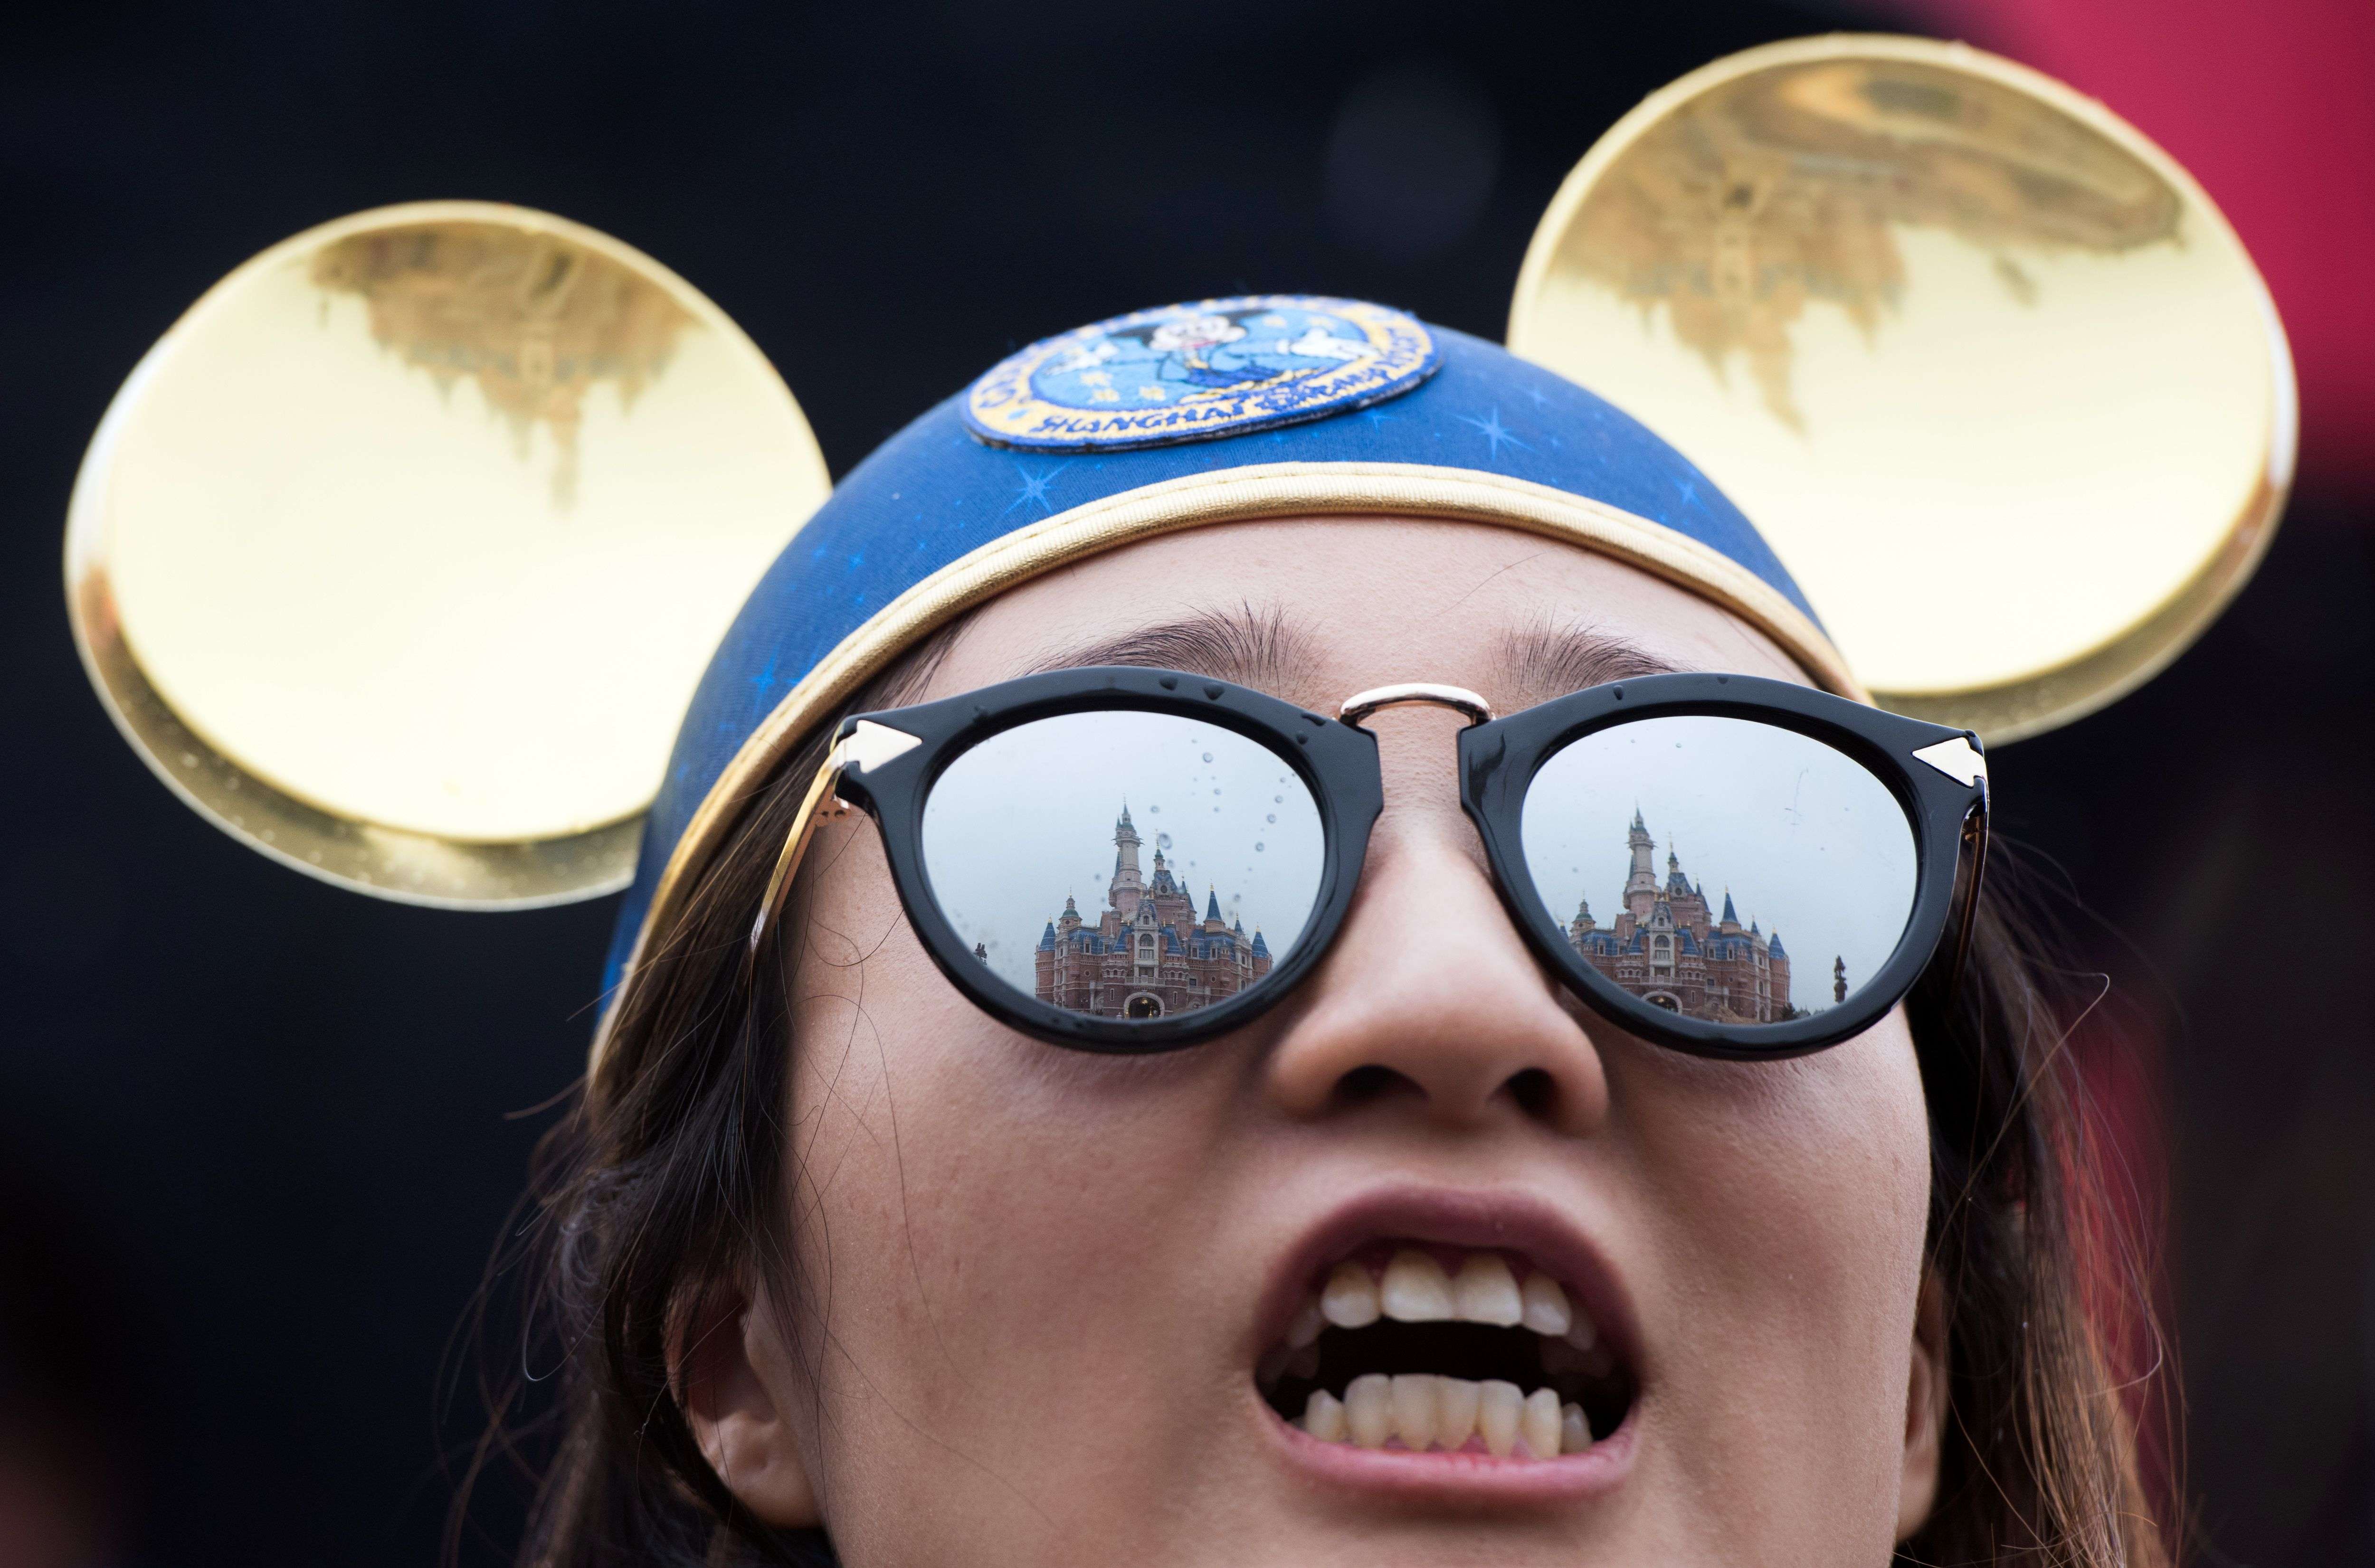 The Enchanted Storybook Castle is reflected in the sunglasses of a girl during the opening ceremony of the Shanghai Disney Resort. Photo: AFP